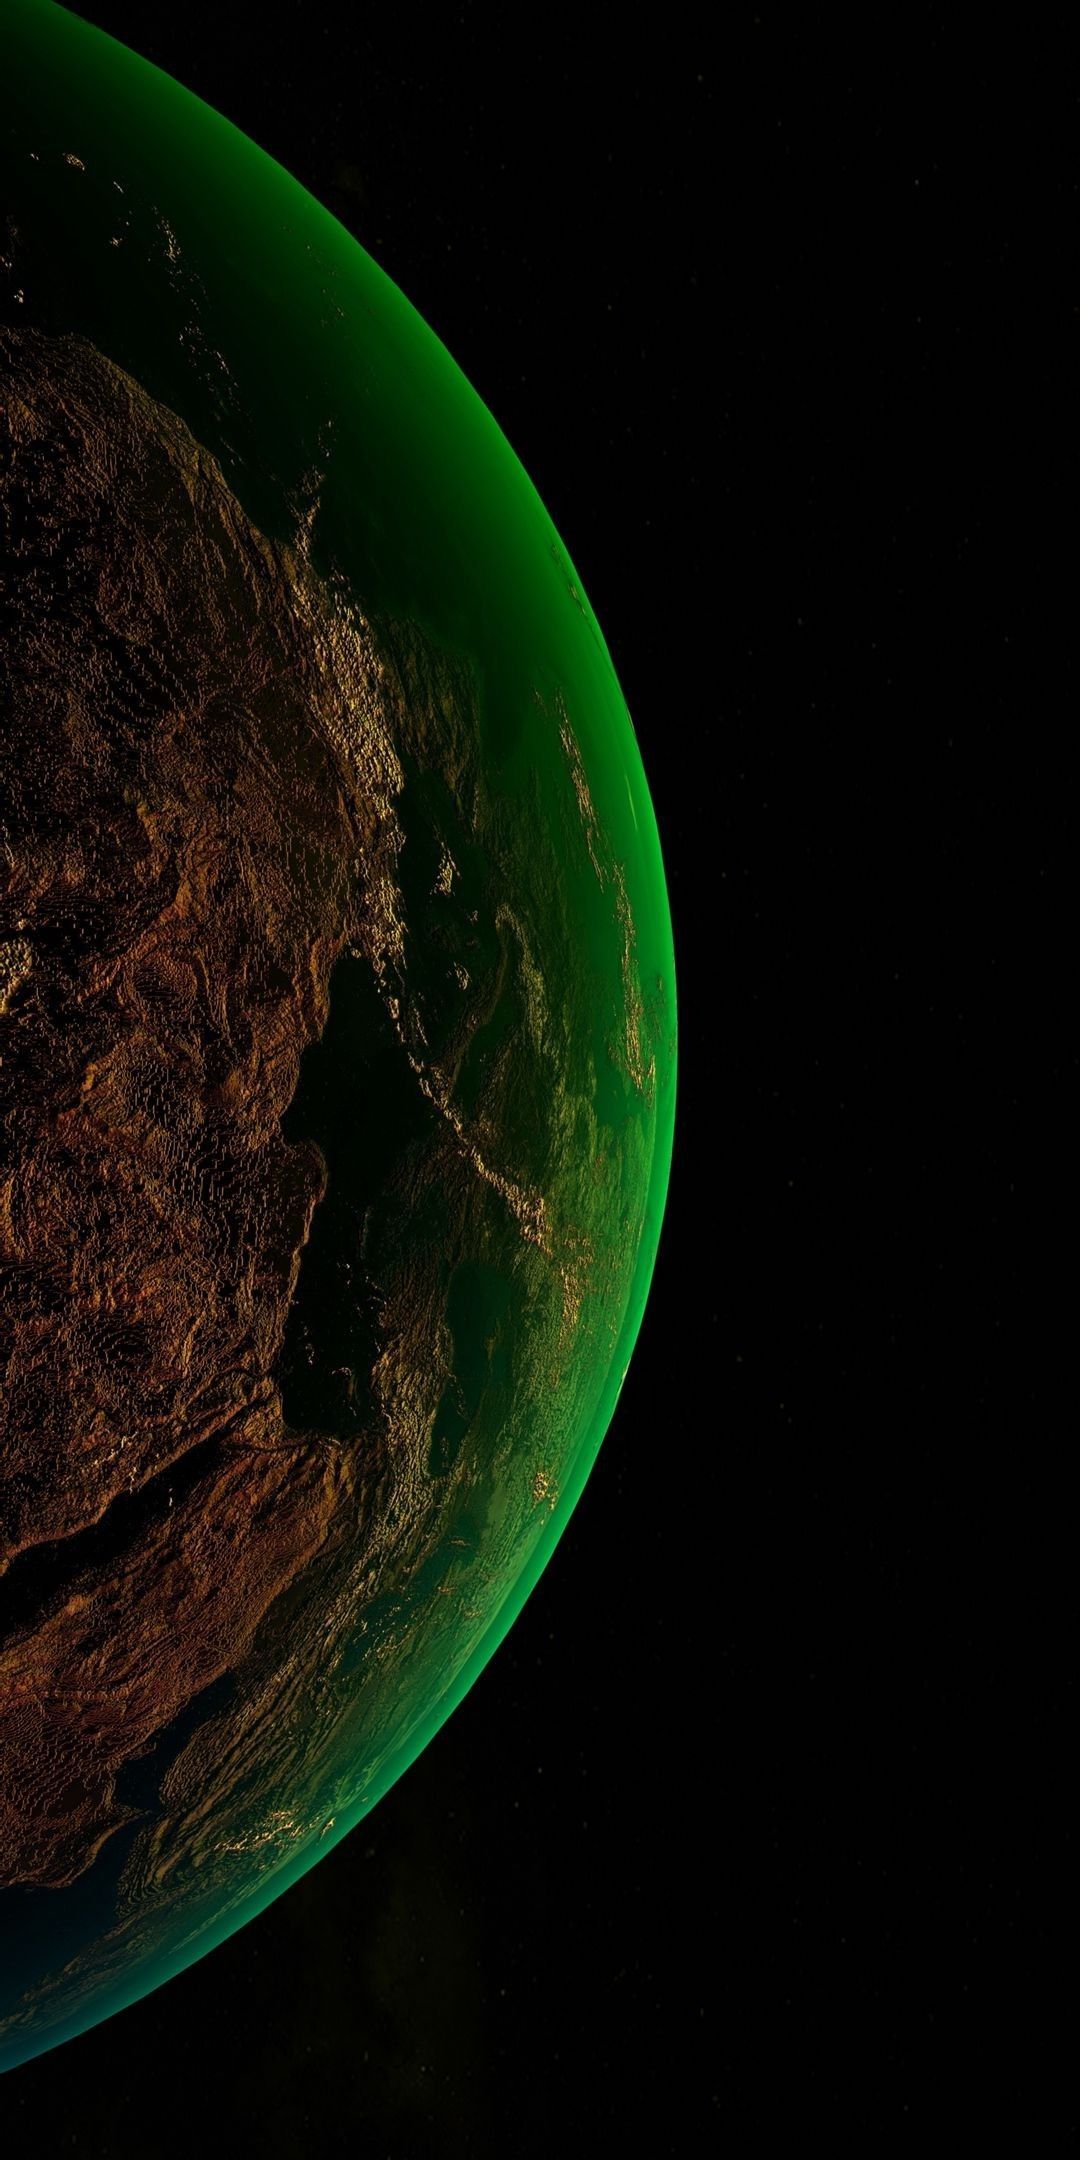 Best AMOLED Wallpaper (Space) image. Wallpaper space